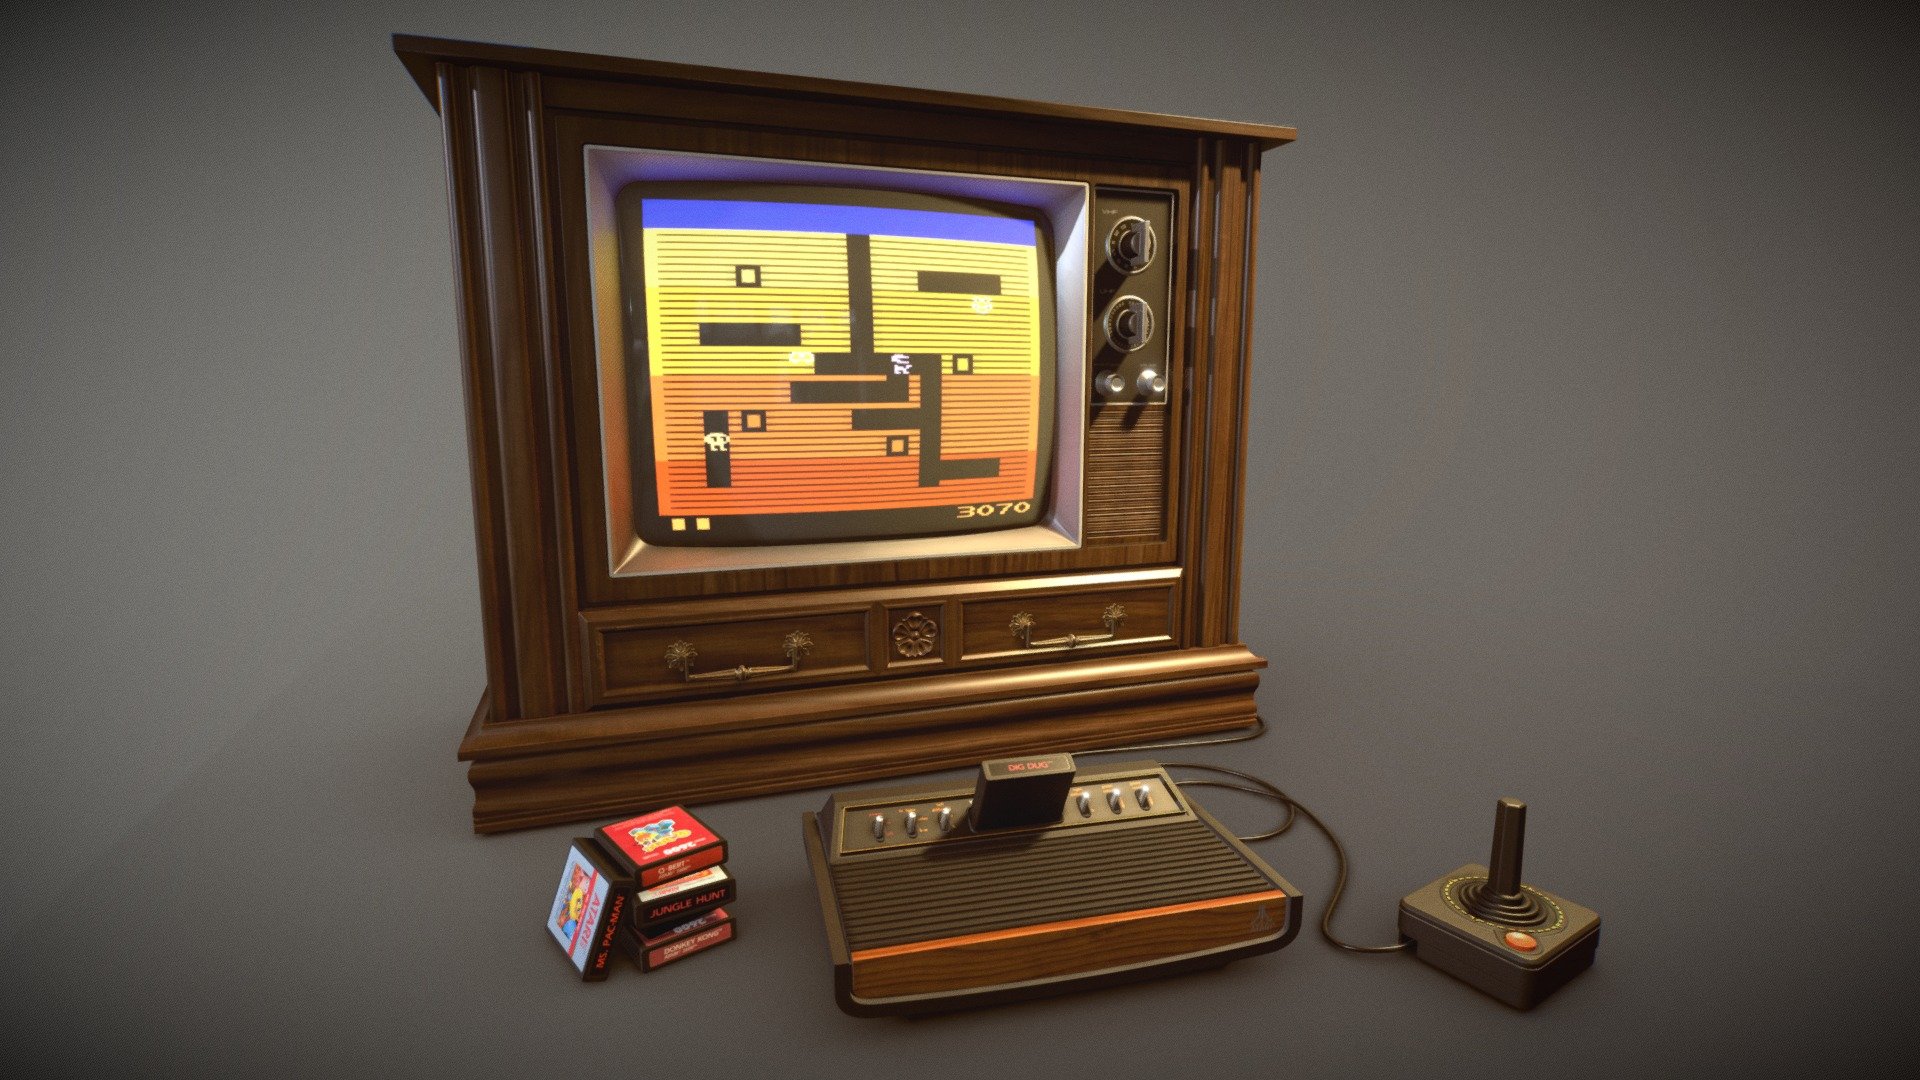 This was a fun project to make, not only because of the classic gaming console but also the early 80's TV. Admittedly, I never actually owned an Atari 2600, but my dear grandma had a TV like this for many years when I was a kid, so it's sentimental to me.

There are many textures included, but don't let it scare you too much; they're all appropriately labelled and easy to apply. A lot of them are 128x128 uniform color textures, which shouldn't add much of an extra workload to your scene, and some materials share the larger textures as well.

There are several cartridge materials included, and you can easily change the TV screen texture, so you could get really creative with what game is playing in your scene! Or you could have it not playing a game and just put your own video on there or something, anything you'd like! I also included a template for the cartridges, so if you get your own images you can use it as an alpha and easily make your own 3d model